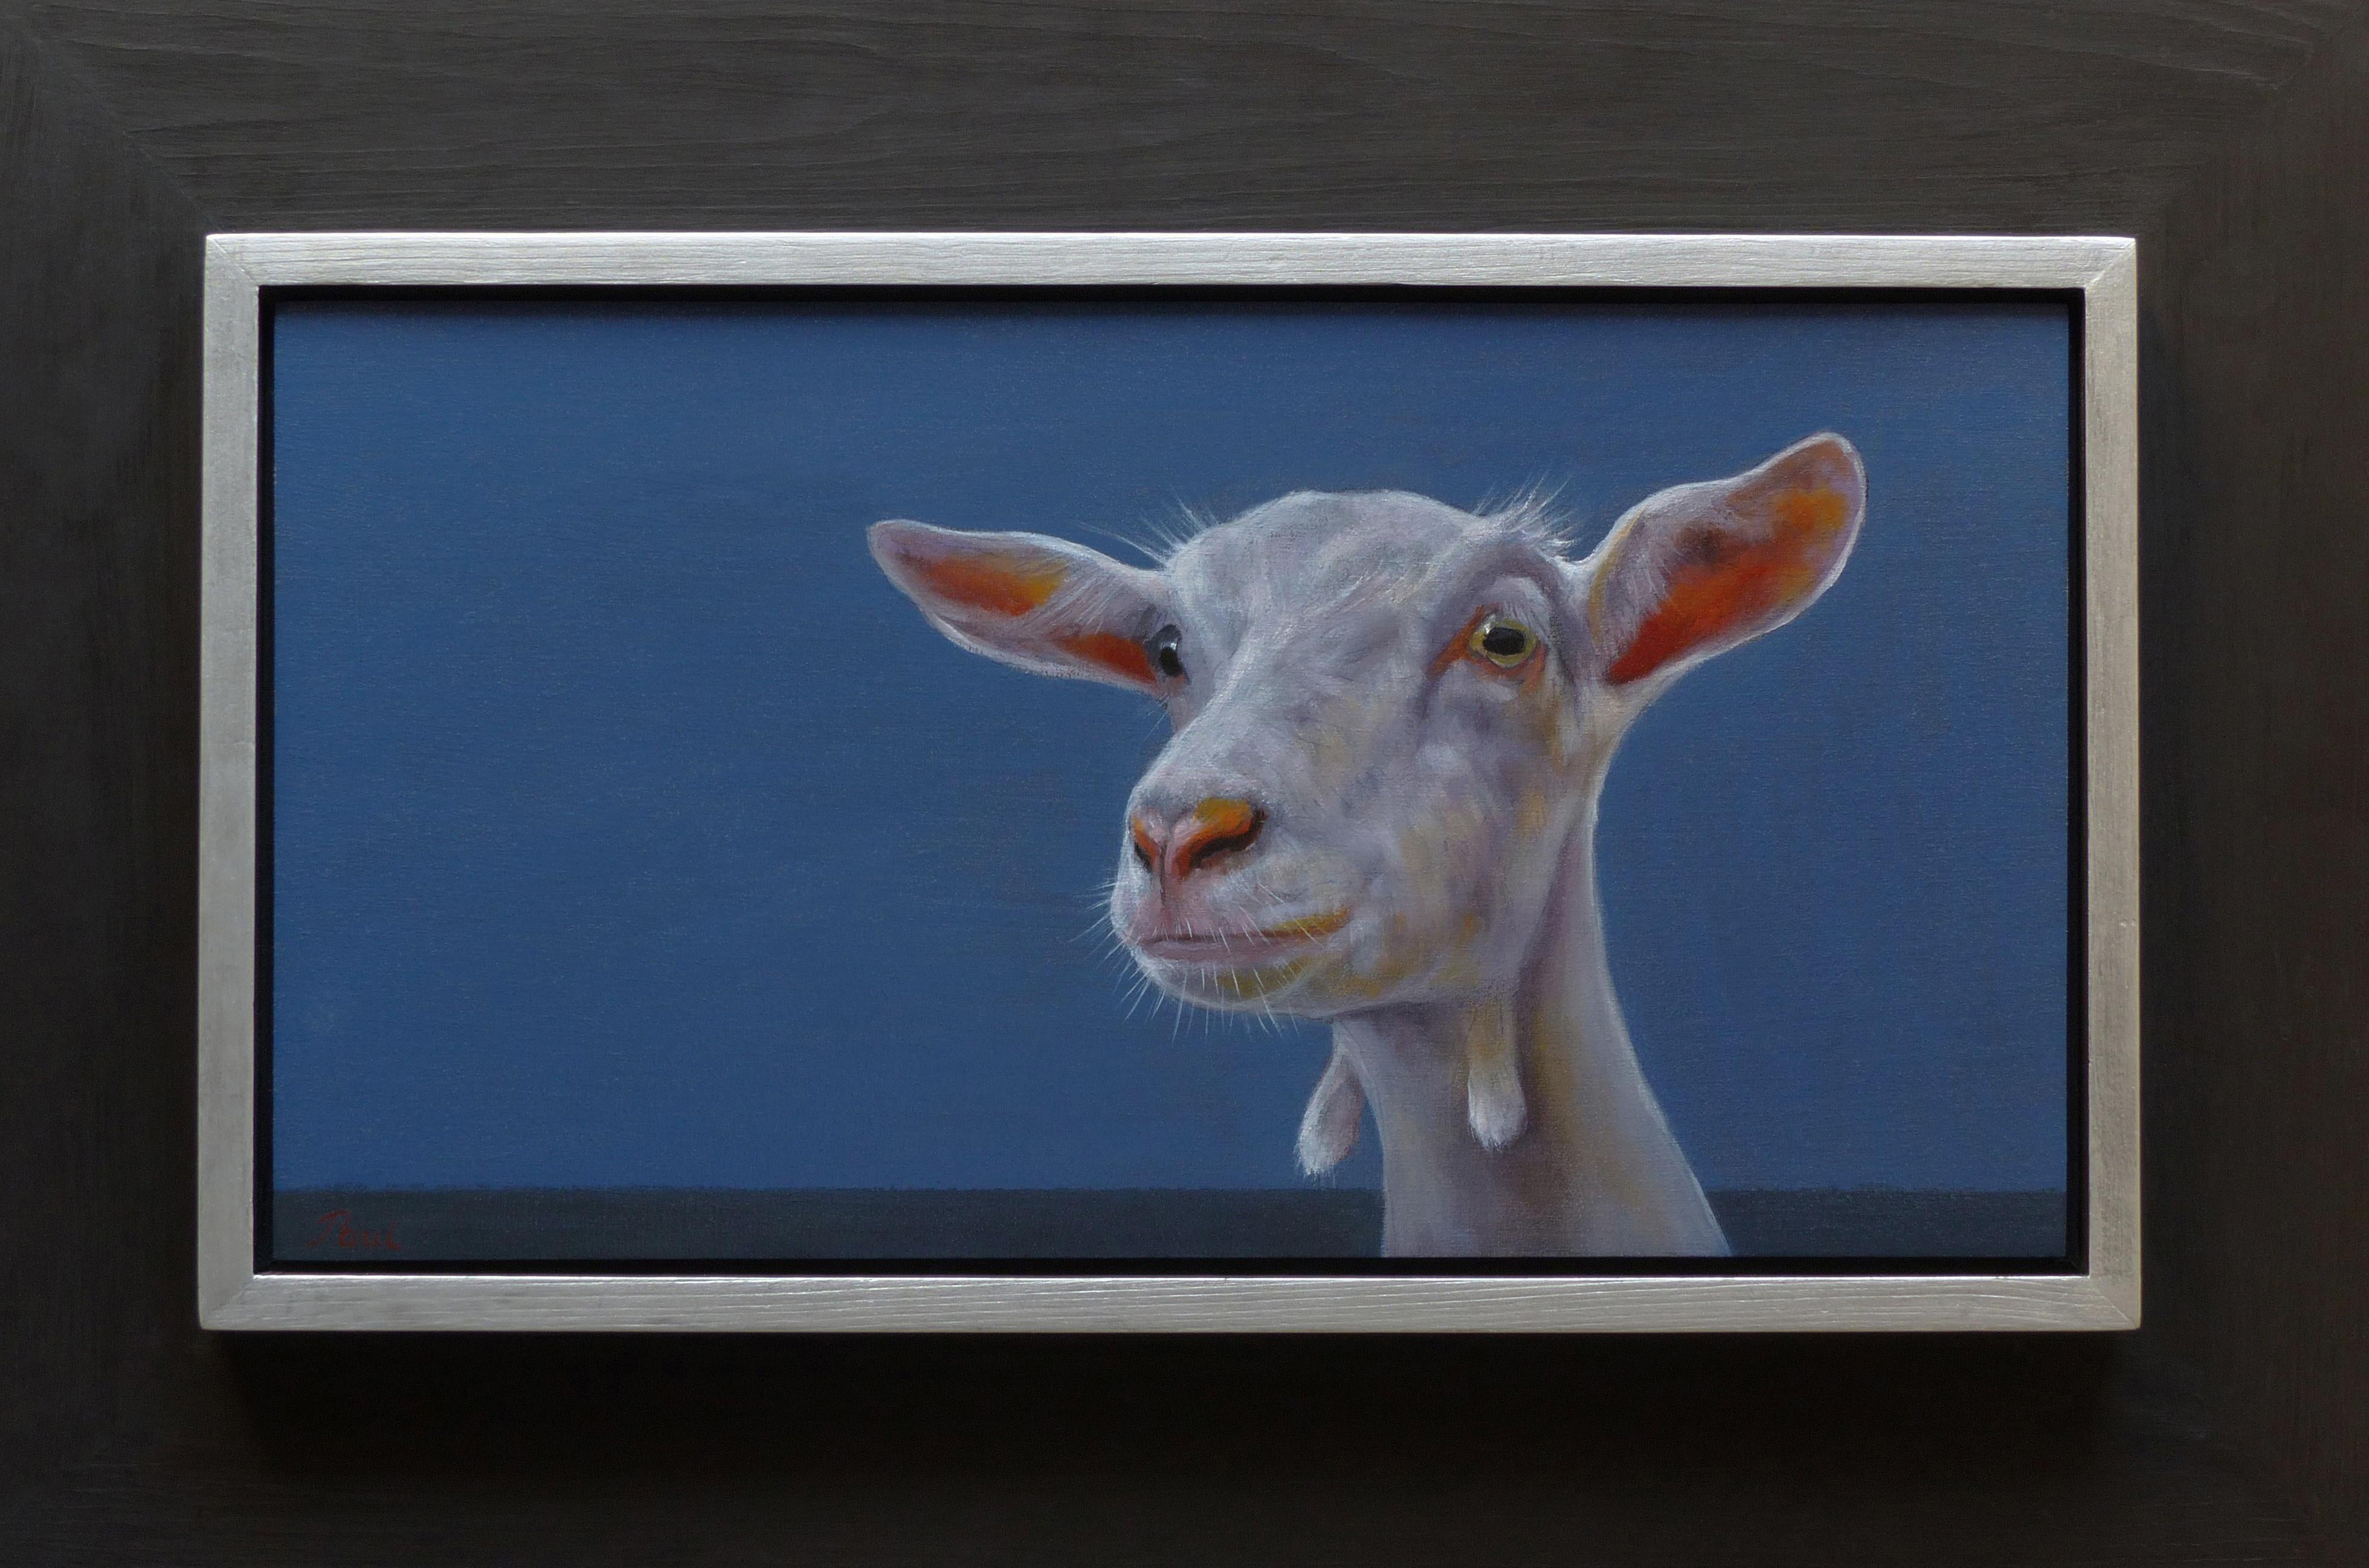 Paul Jansen Animal Painting - "Goat" Contemporary Dutch Oil Painting of a White Goat